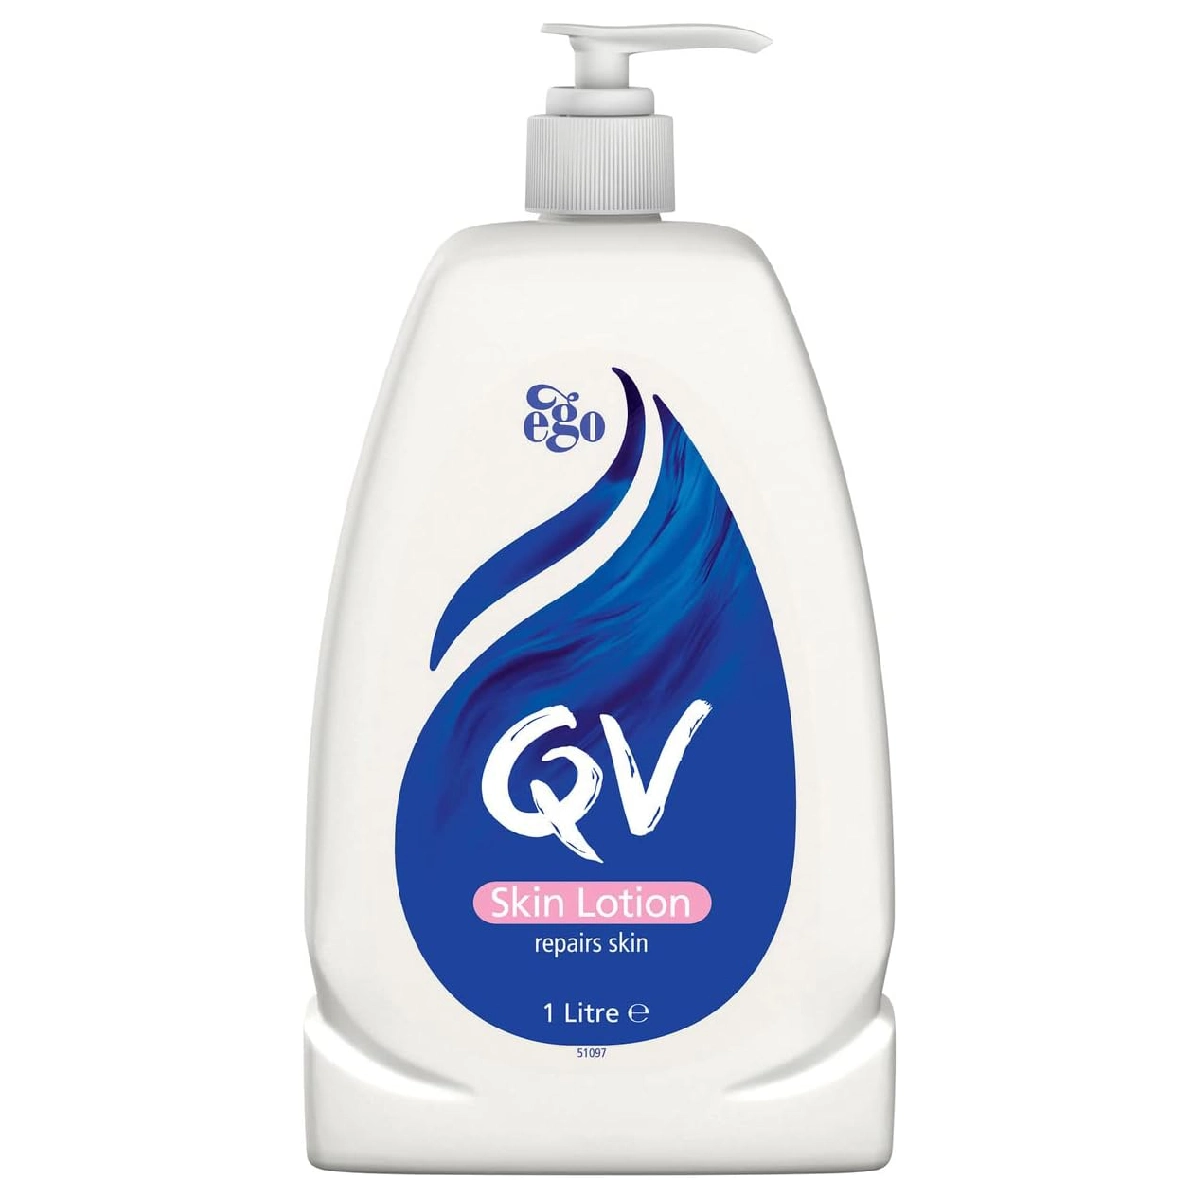 Bottle of QV Skin Lotion on a white background